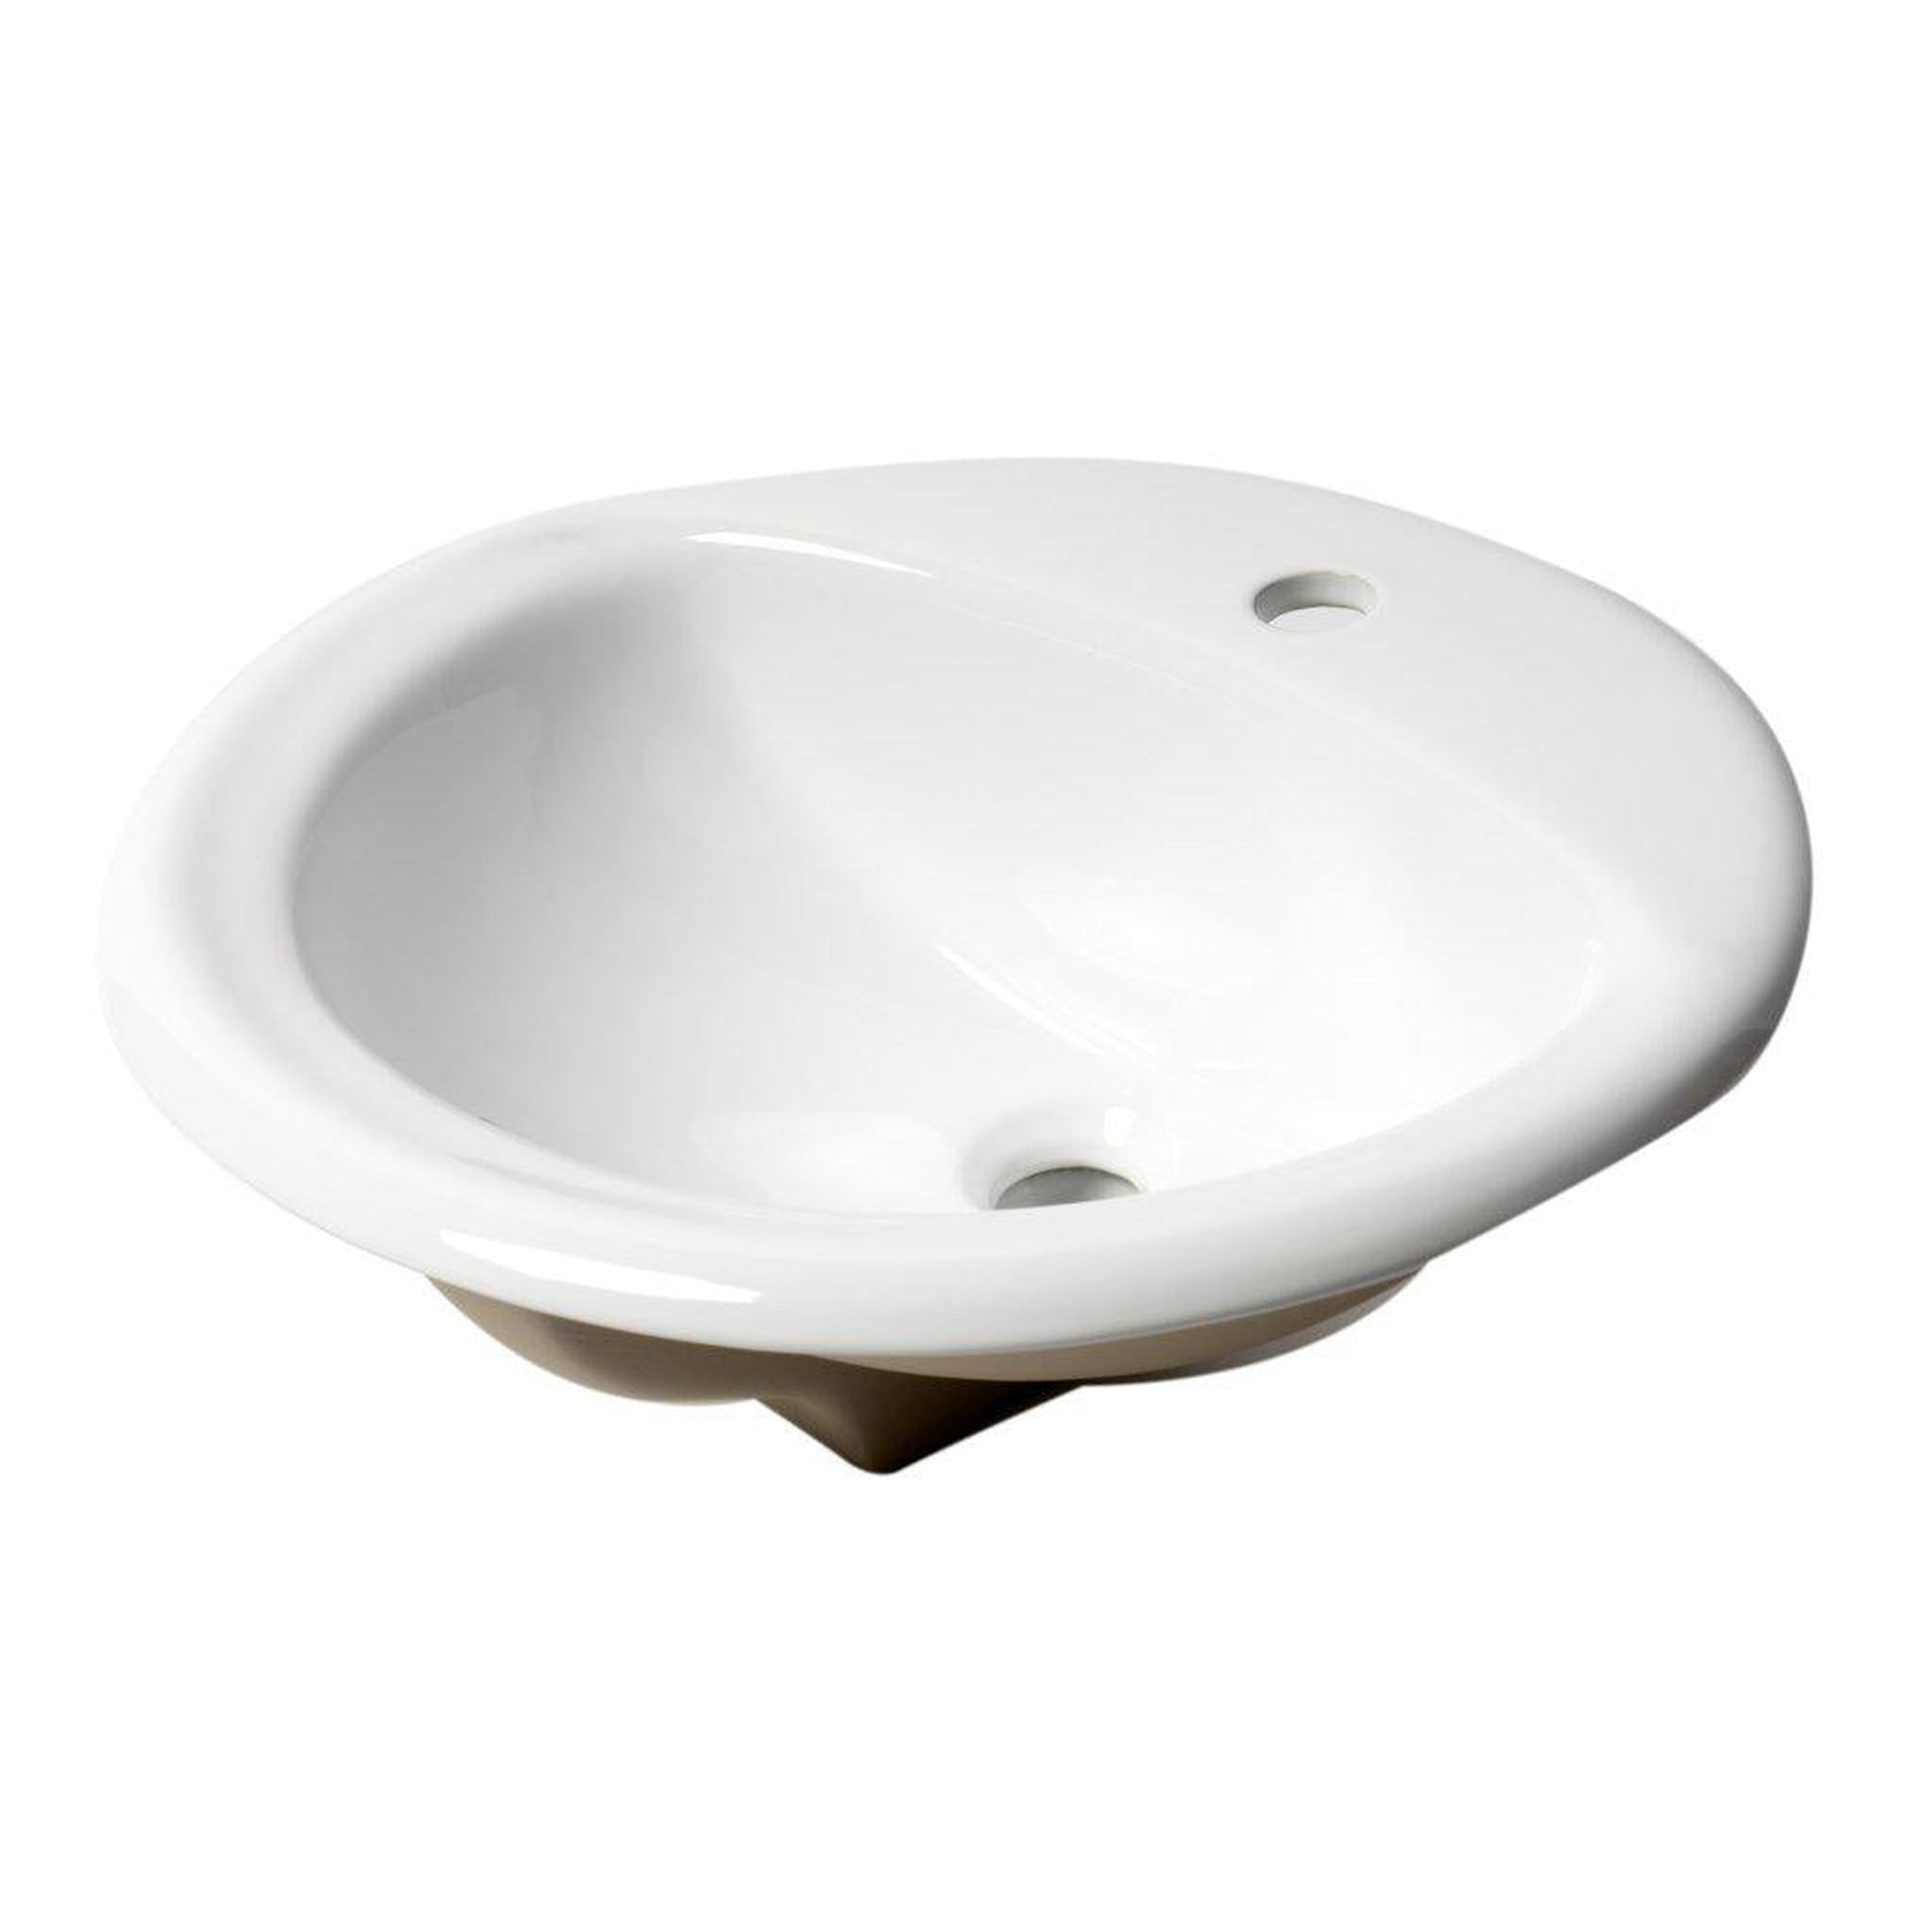 ALFI Brand ABC802 21" White Glossy Drop In Oval Ceramic Bathroom Sink With Single Faucet Hole and Overflow